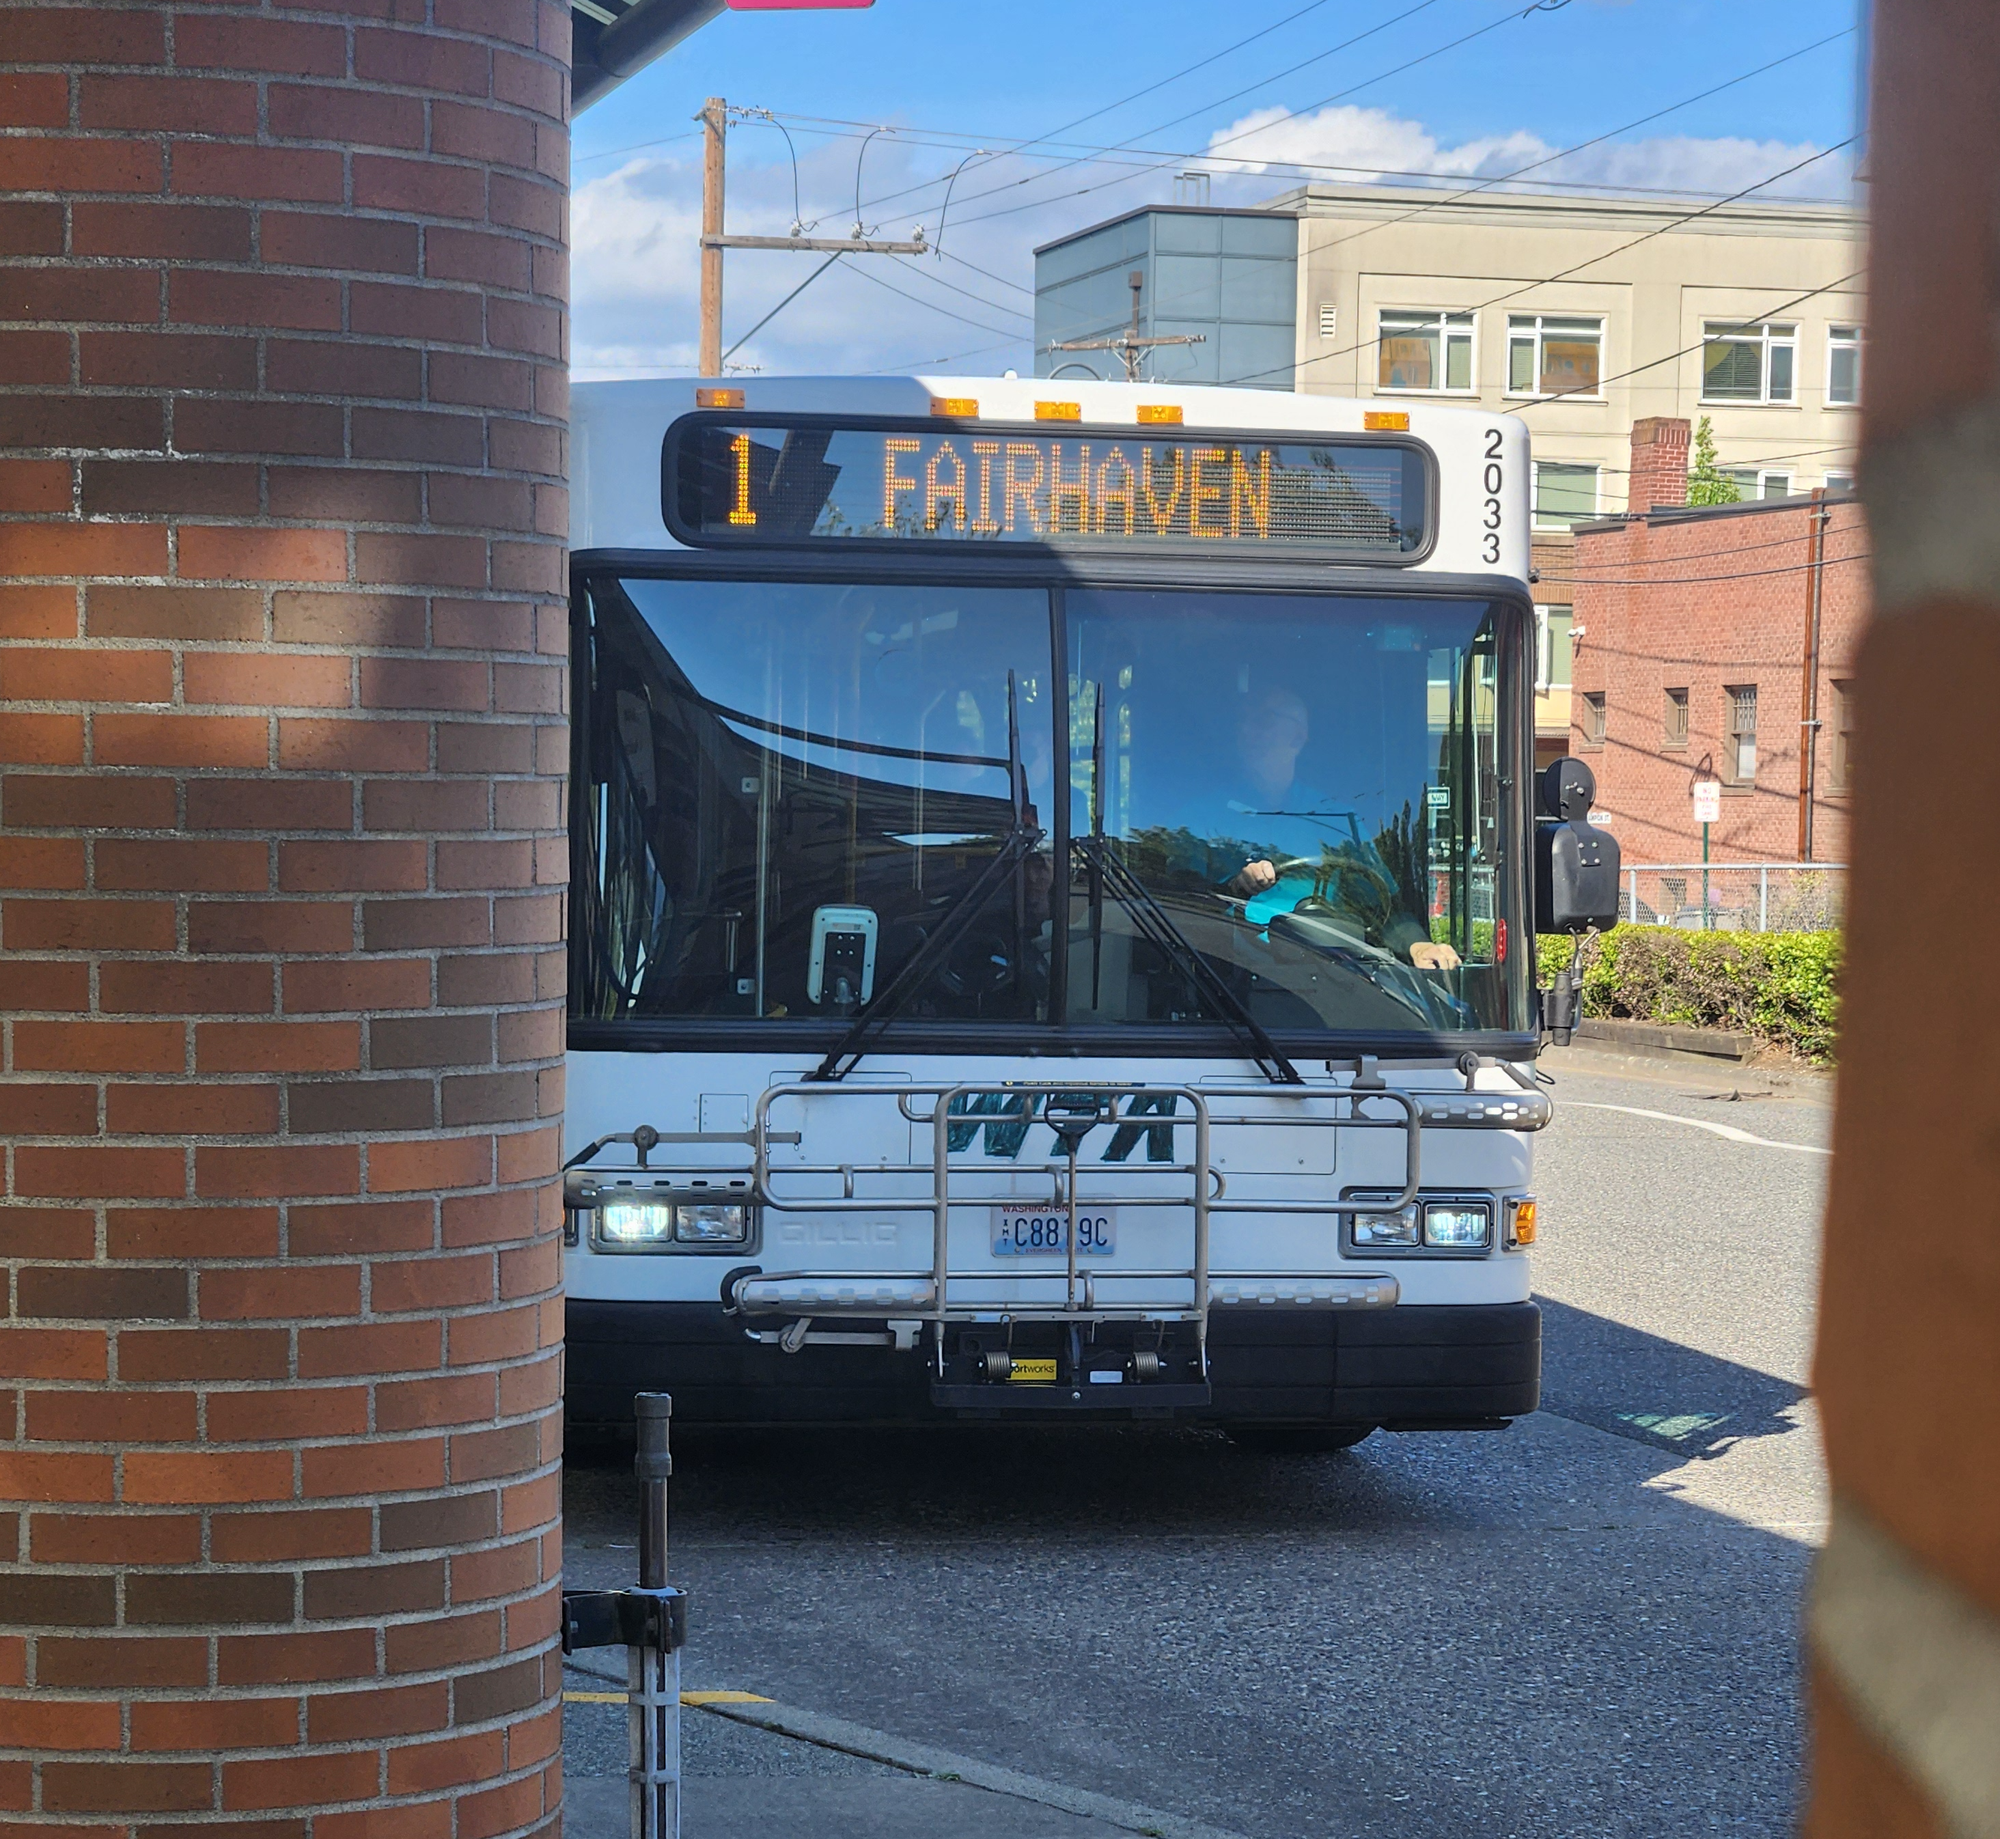 A WTA bus for Route 1 / Fairhaven pulls into a bus bay at Bellingham Station.